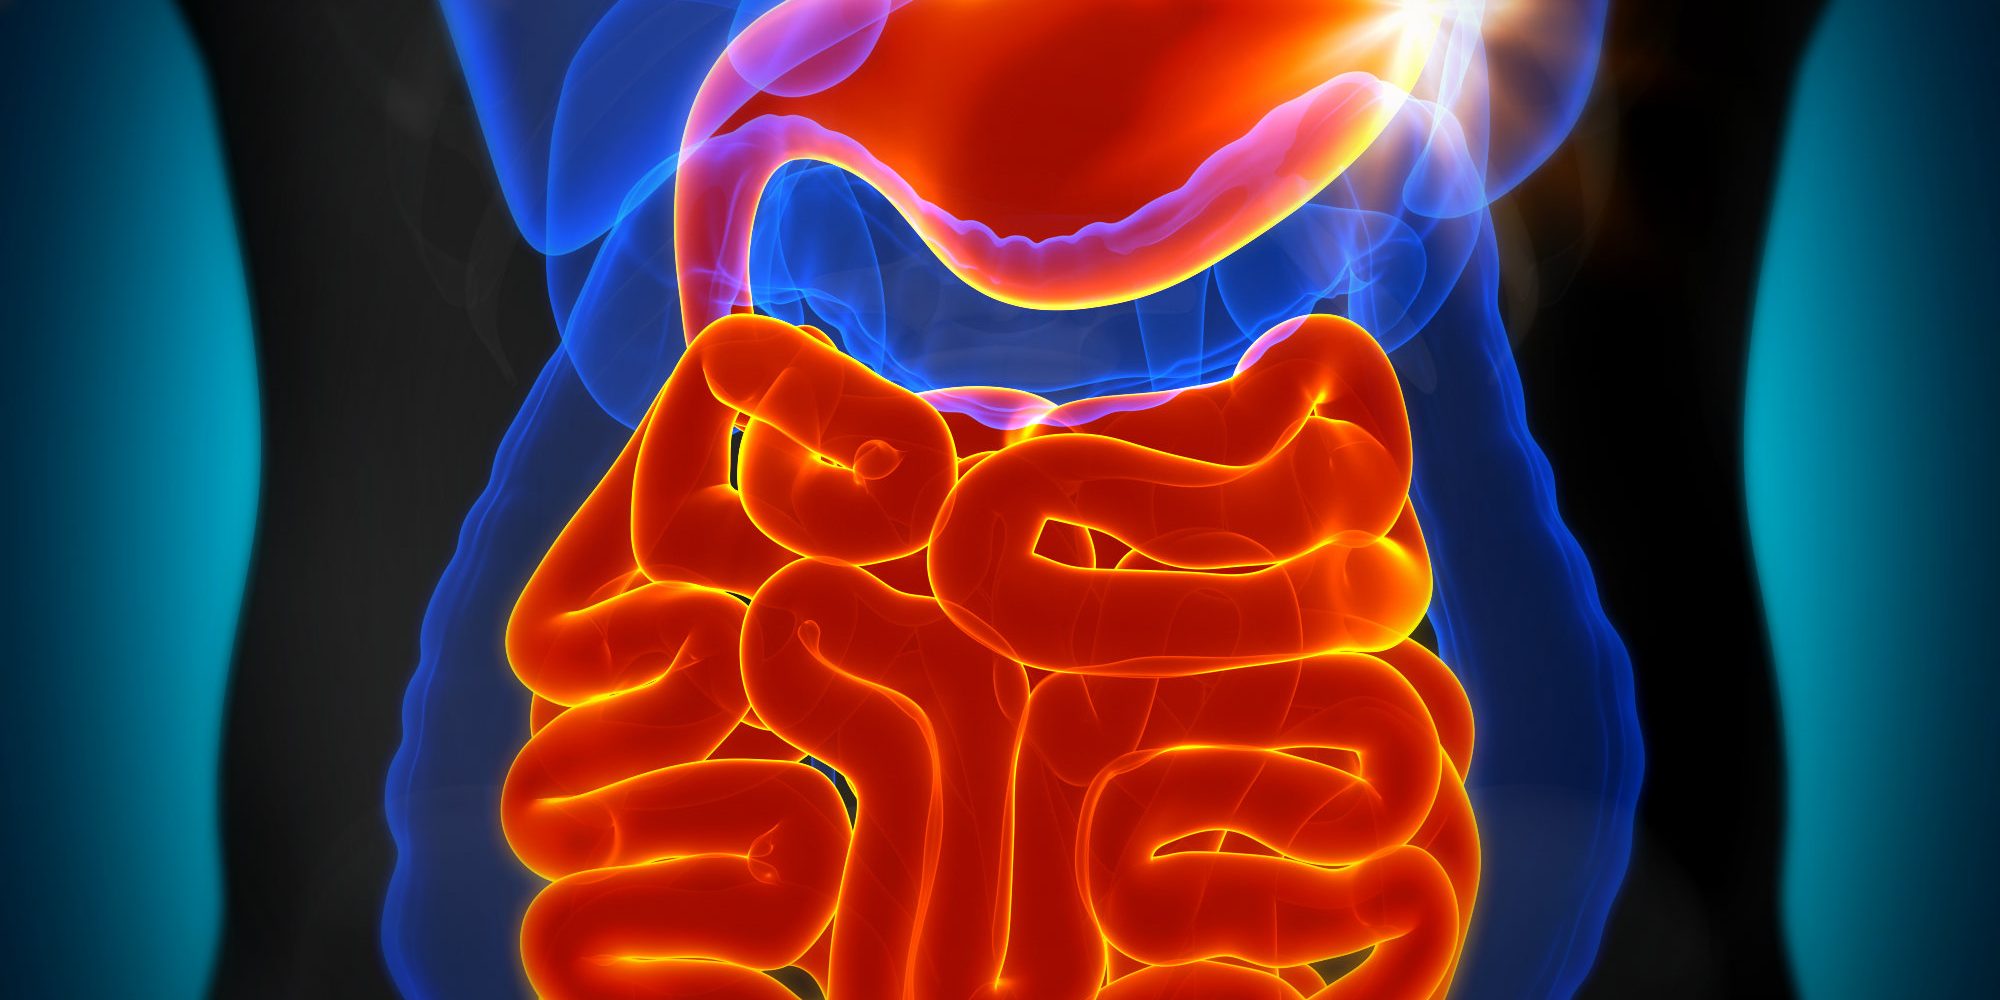 image of the stomach and intestines in the gut